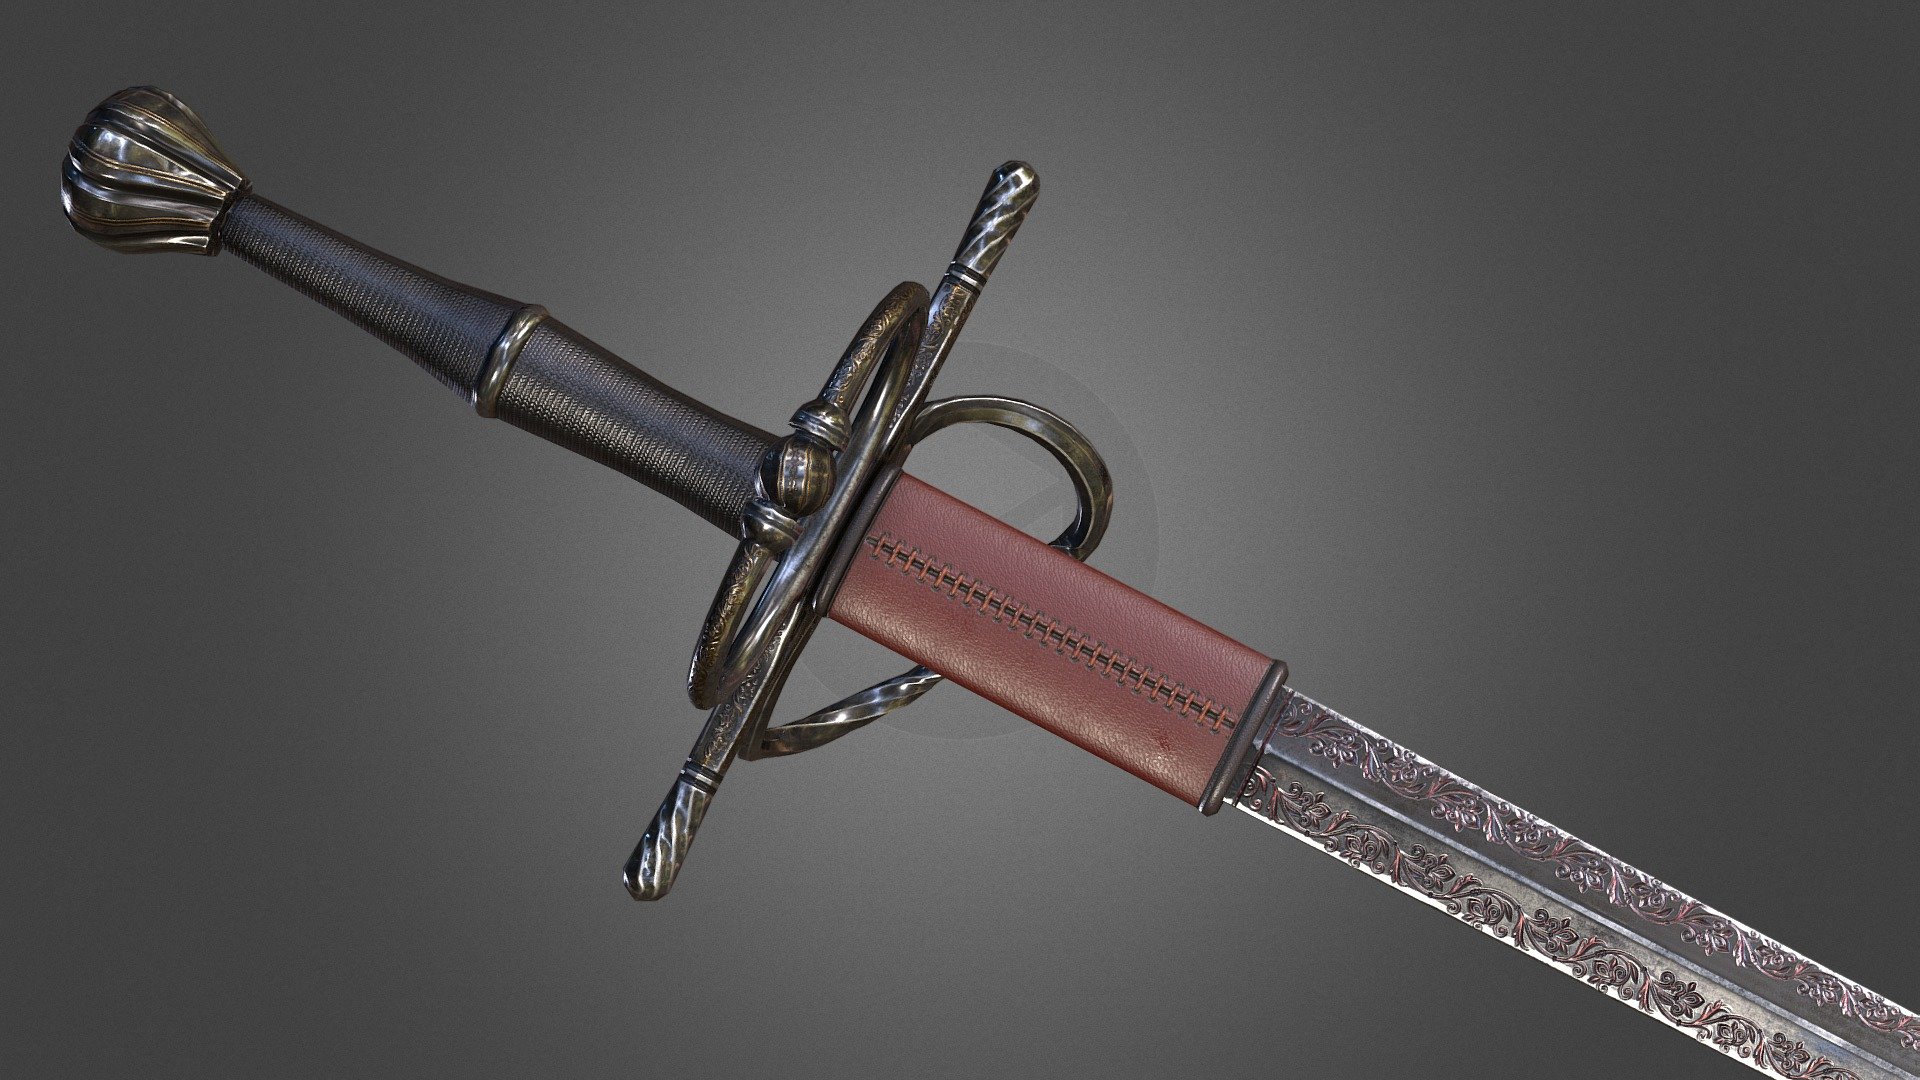 Maya Files and Unreal Texure included upon purchase

A prestige bastard sword.125cm in length, one or two-handed.

The blade is especially narrow but thick compared to other bastard sword variants, supported by its red leather foregrip, making it an ideal thrusting weapon.

Floral-shaped Pommel with golden lining, steel cord handle, alongside a twisted steel guard.

The inscription on the blade says: Light to drive away the darkness, and darkness to shield the light in Italian.

Dark-red Flame-like vines are indented upon the blade, marking its family history of fire and thorn.

Did somewhat extensive study of Italian sword aesthetic to make sure I don't stray too much from the path.

Our twitter: https://twitter.com/ArmoredInterac1

You can also send me a commission if you want something done! - Deadland Series_12_Constantine - Buy Royalty Free 3D model by Armored Interactive (@ychiang6) 3d model